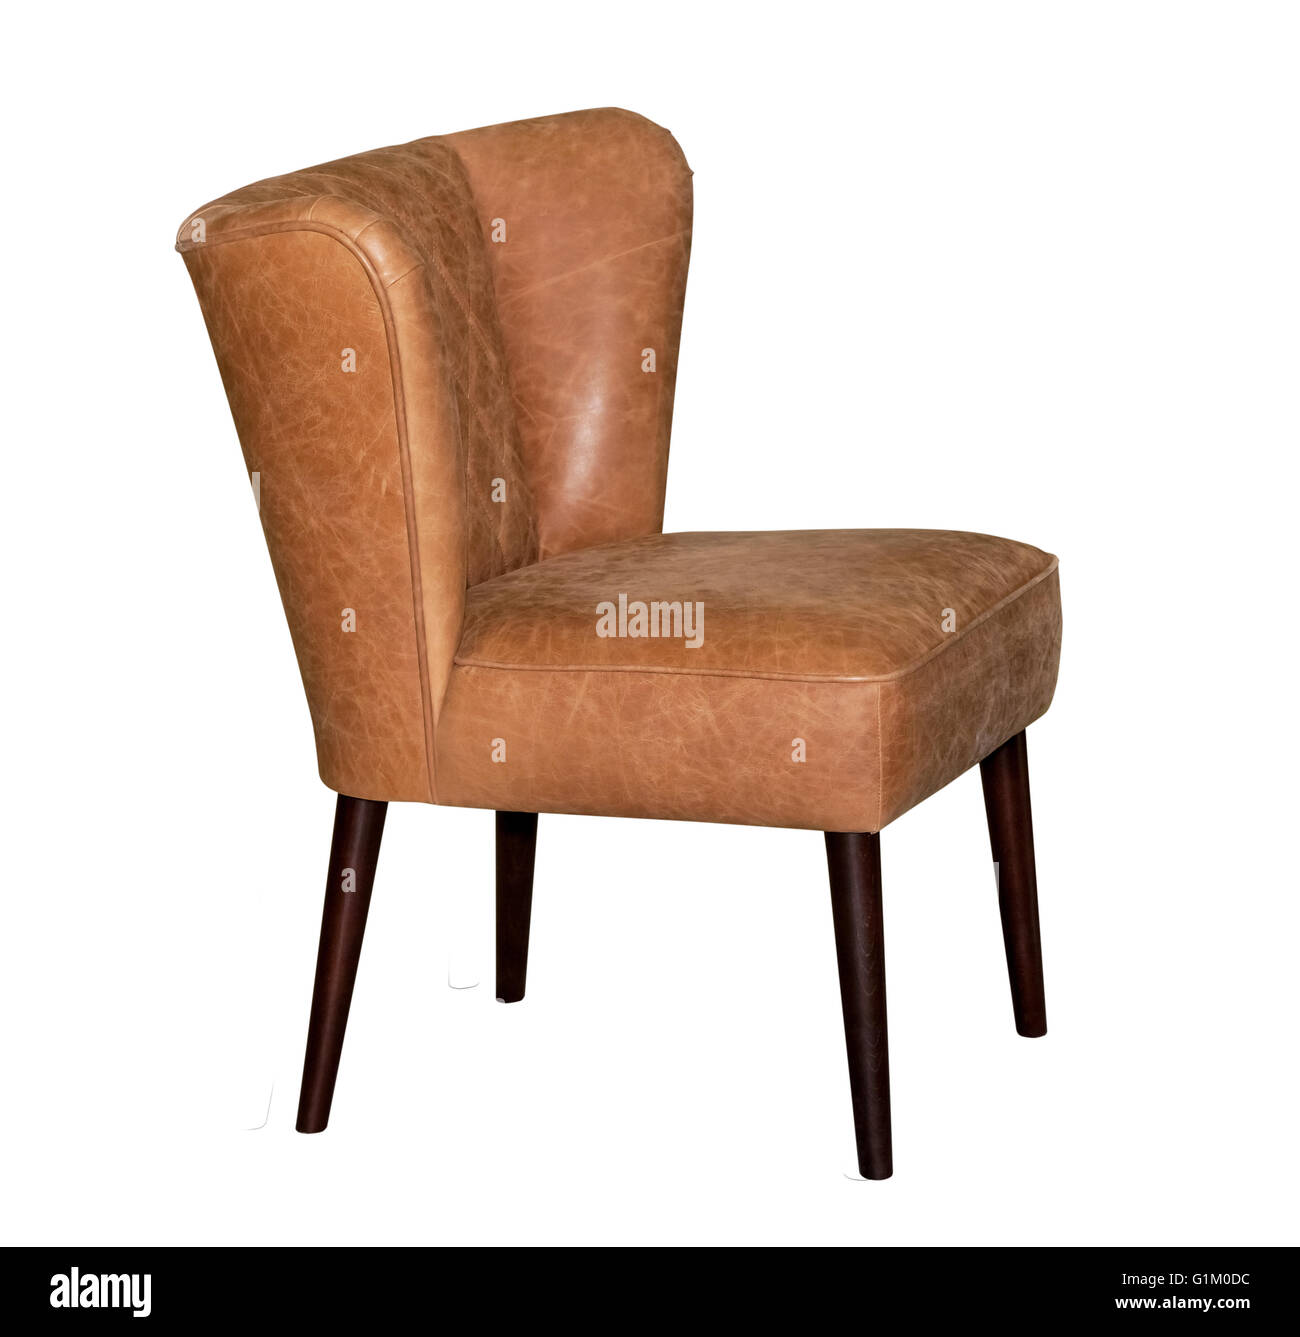 Brown leather modern chair isolated Stock Photo